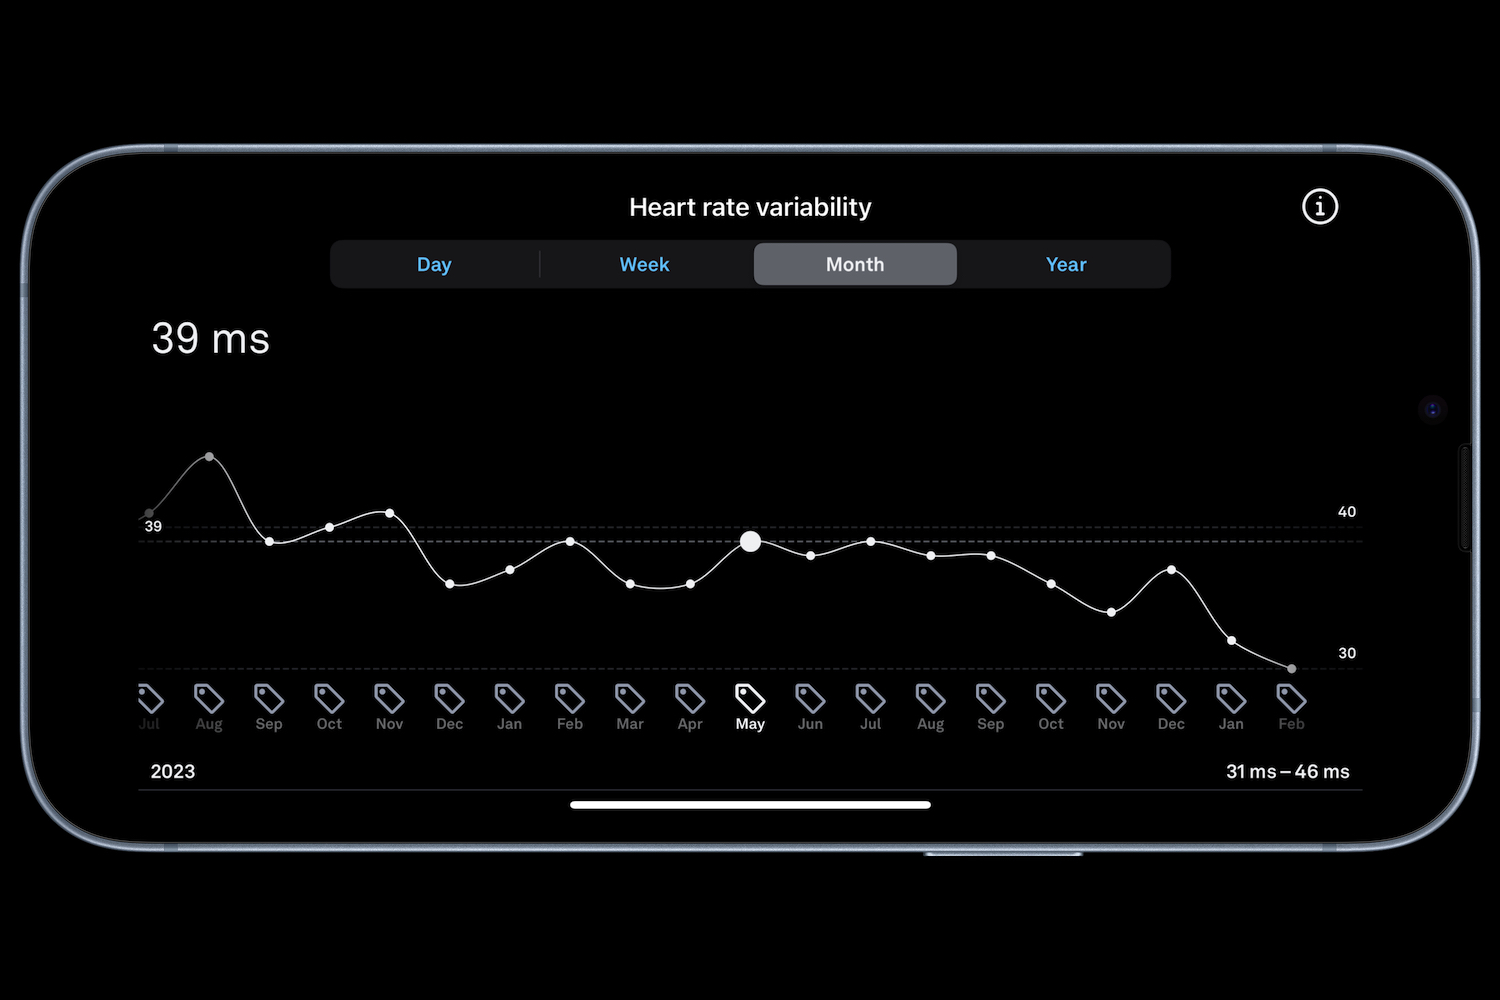 A screenshot from the Oura Ring app showing heart rate variability data.